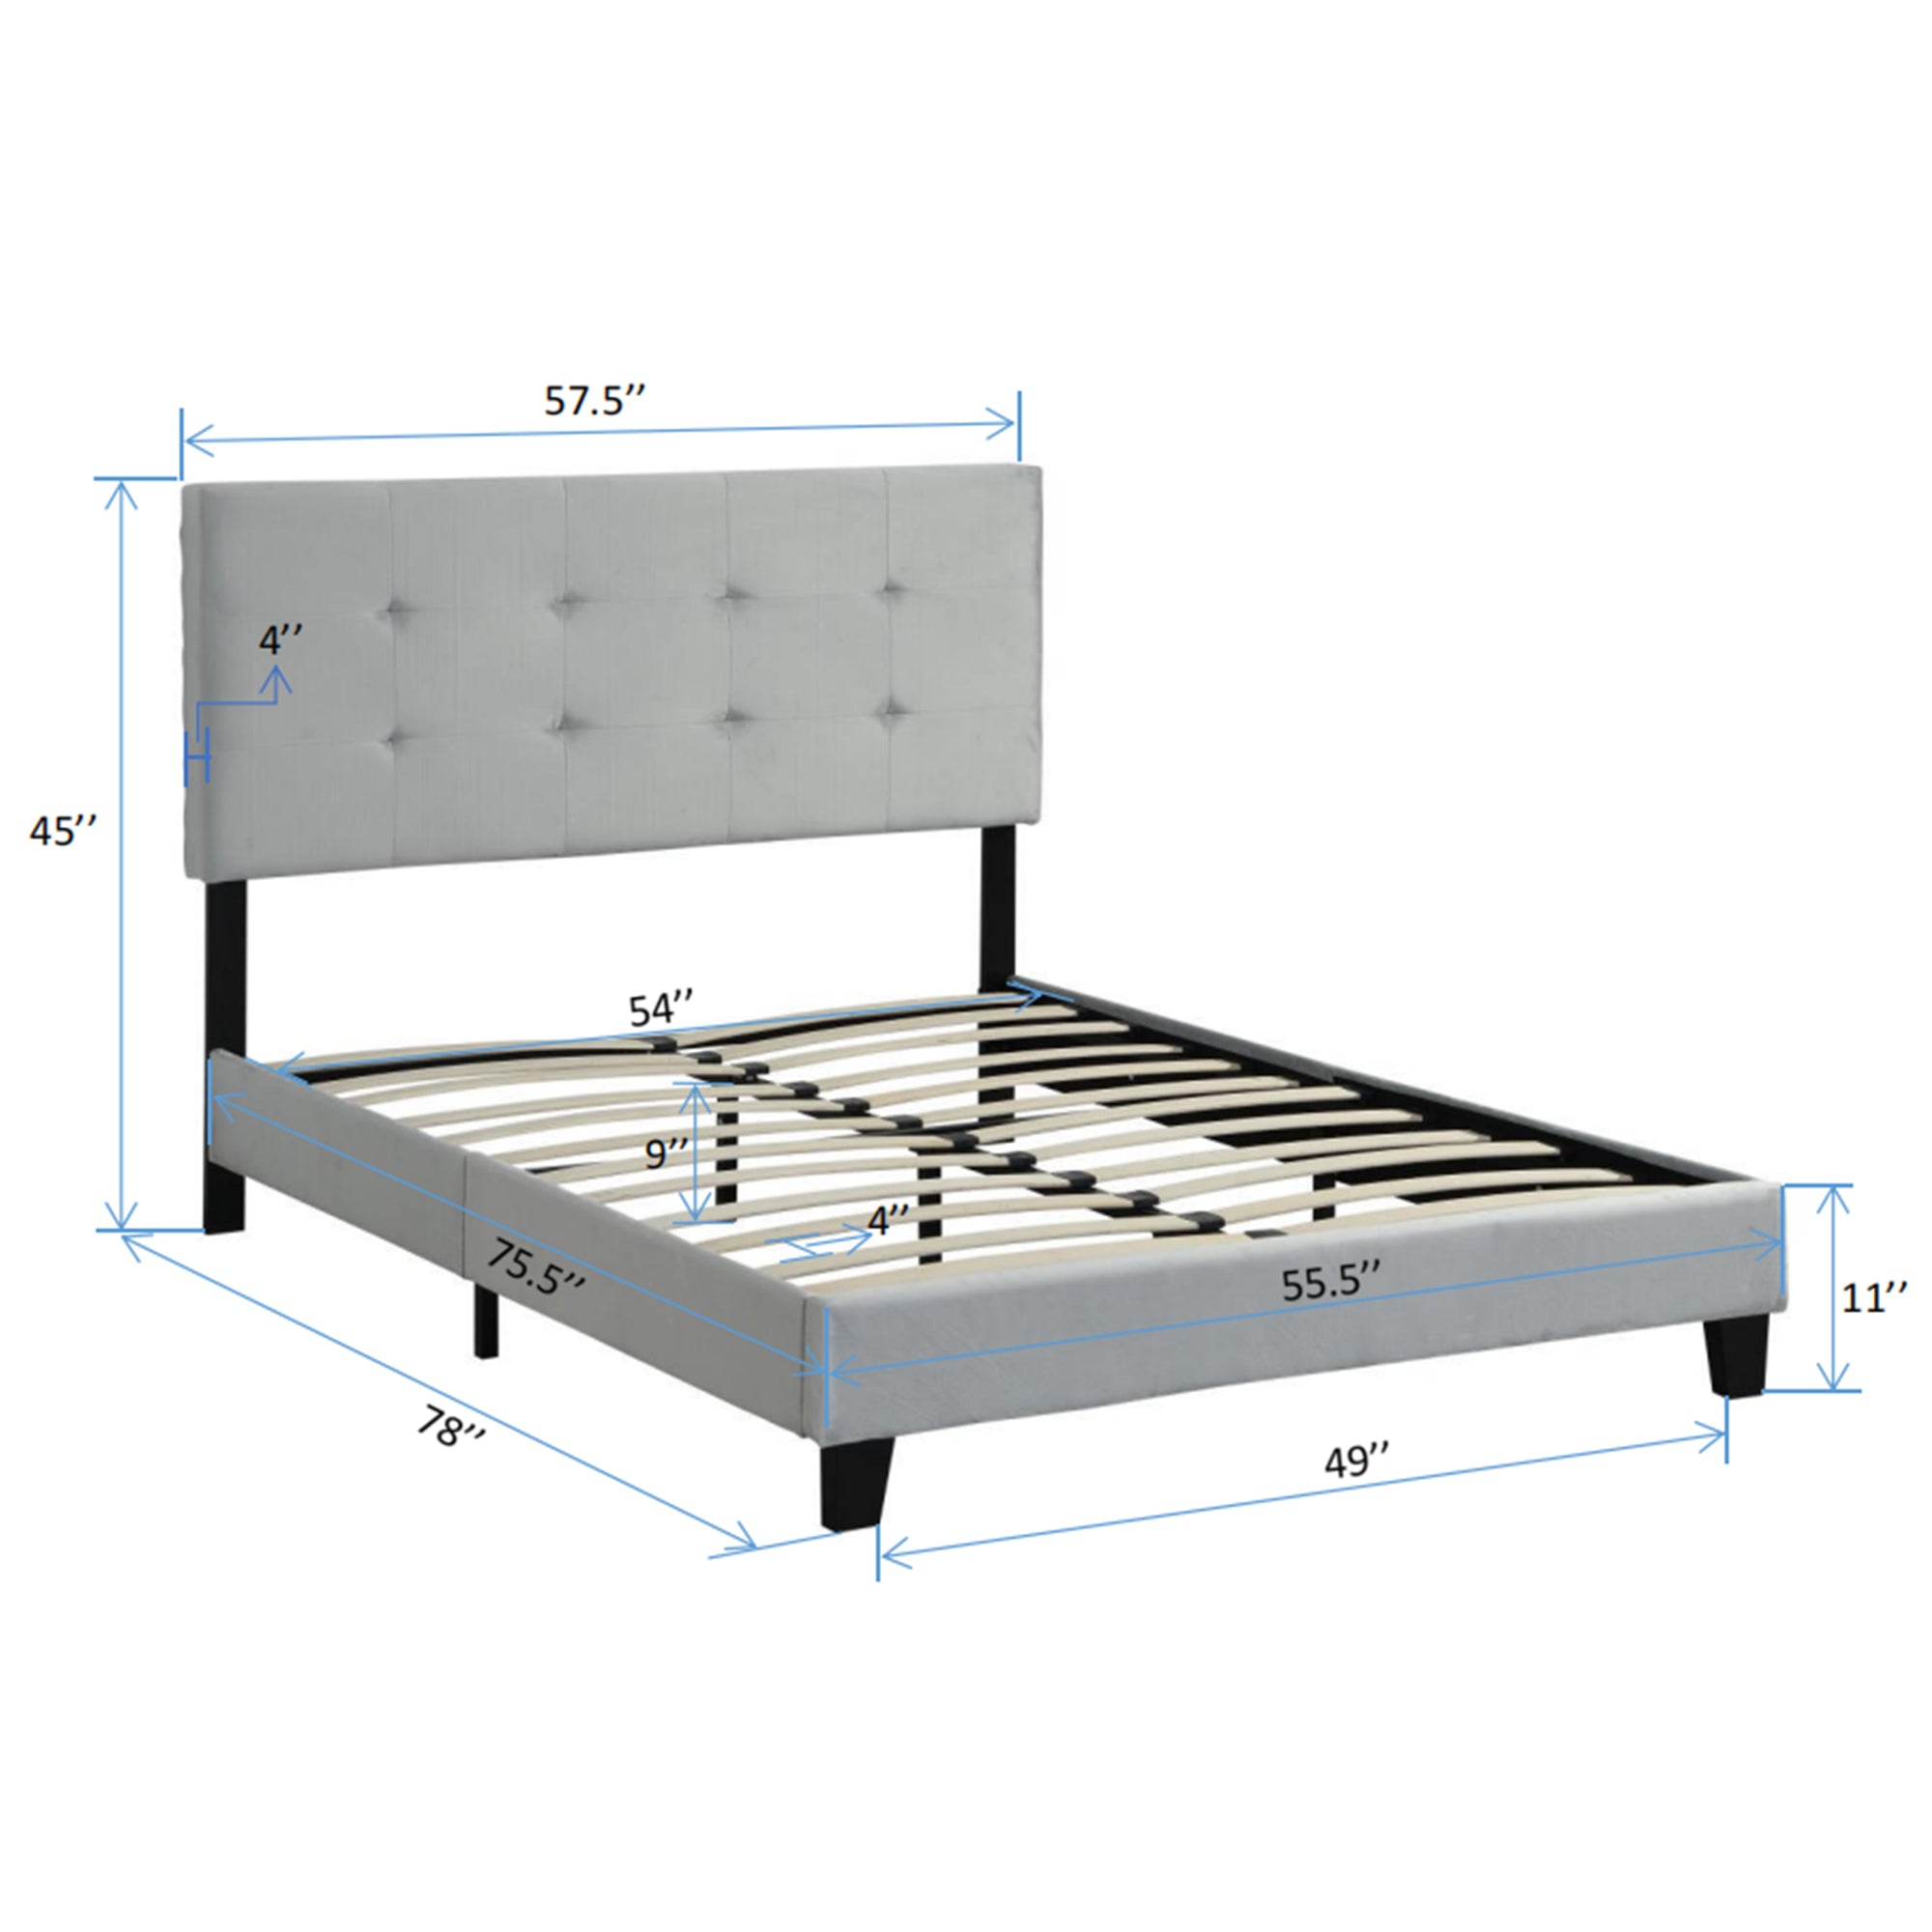 ZNTS Full Size Upholstered Platform Bed Frame with pull point Tufted Headboard, Strong Wood Slat Support, W31136118